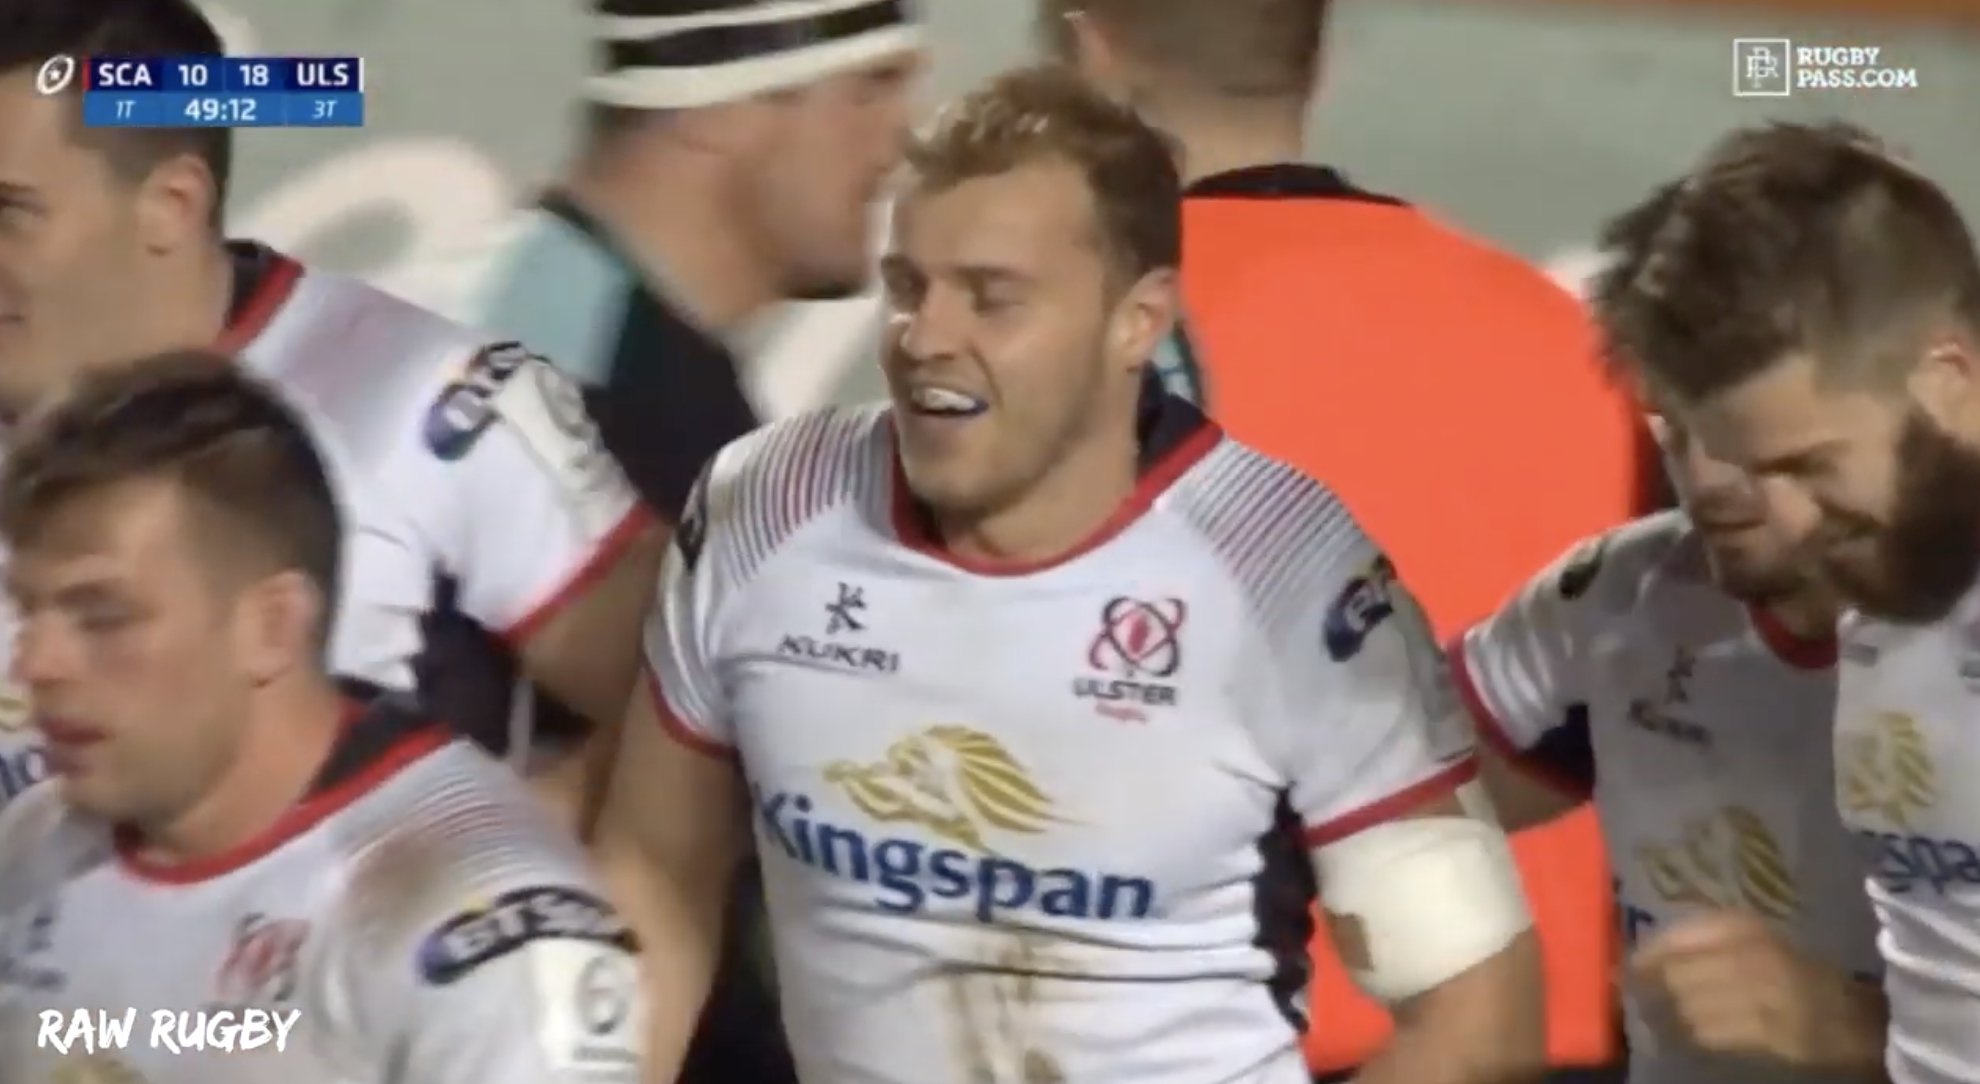 WATCH: Half a season of highlights reveal just how good Will Addison has been for Ulster this year